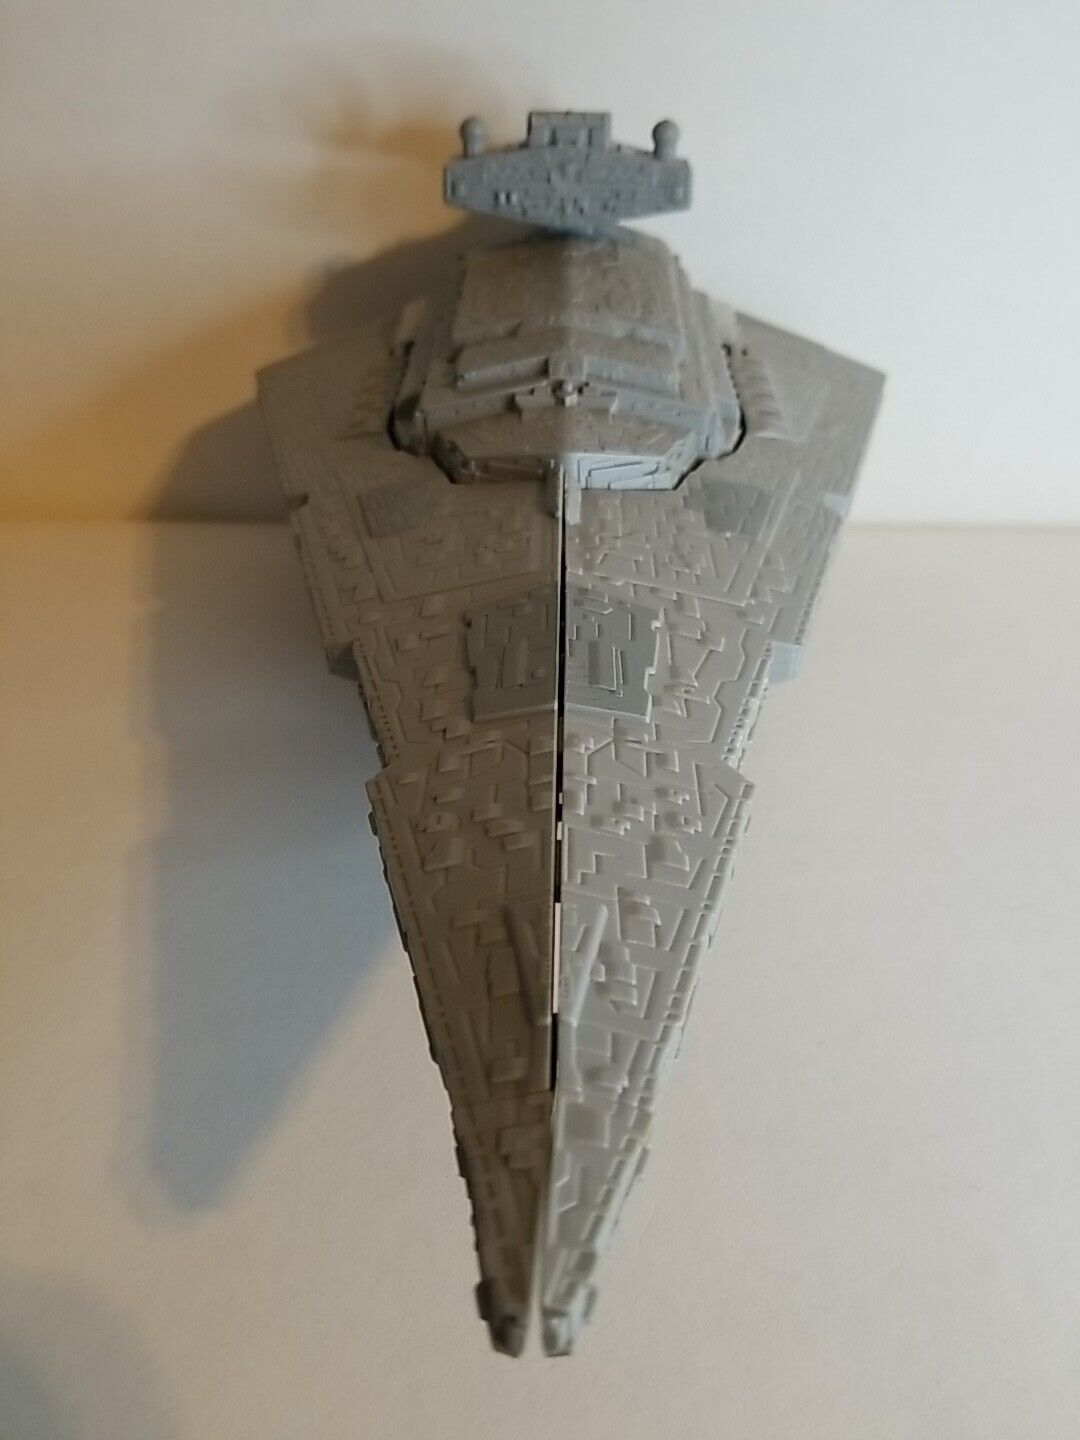 Star Wars 2014 Hasbro Gray Imperial Star Destroyer Command Ship No Remote